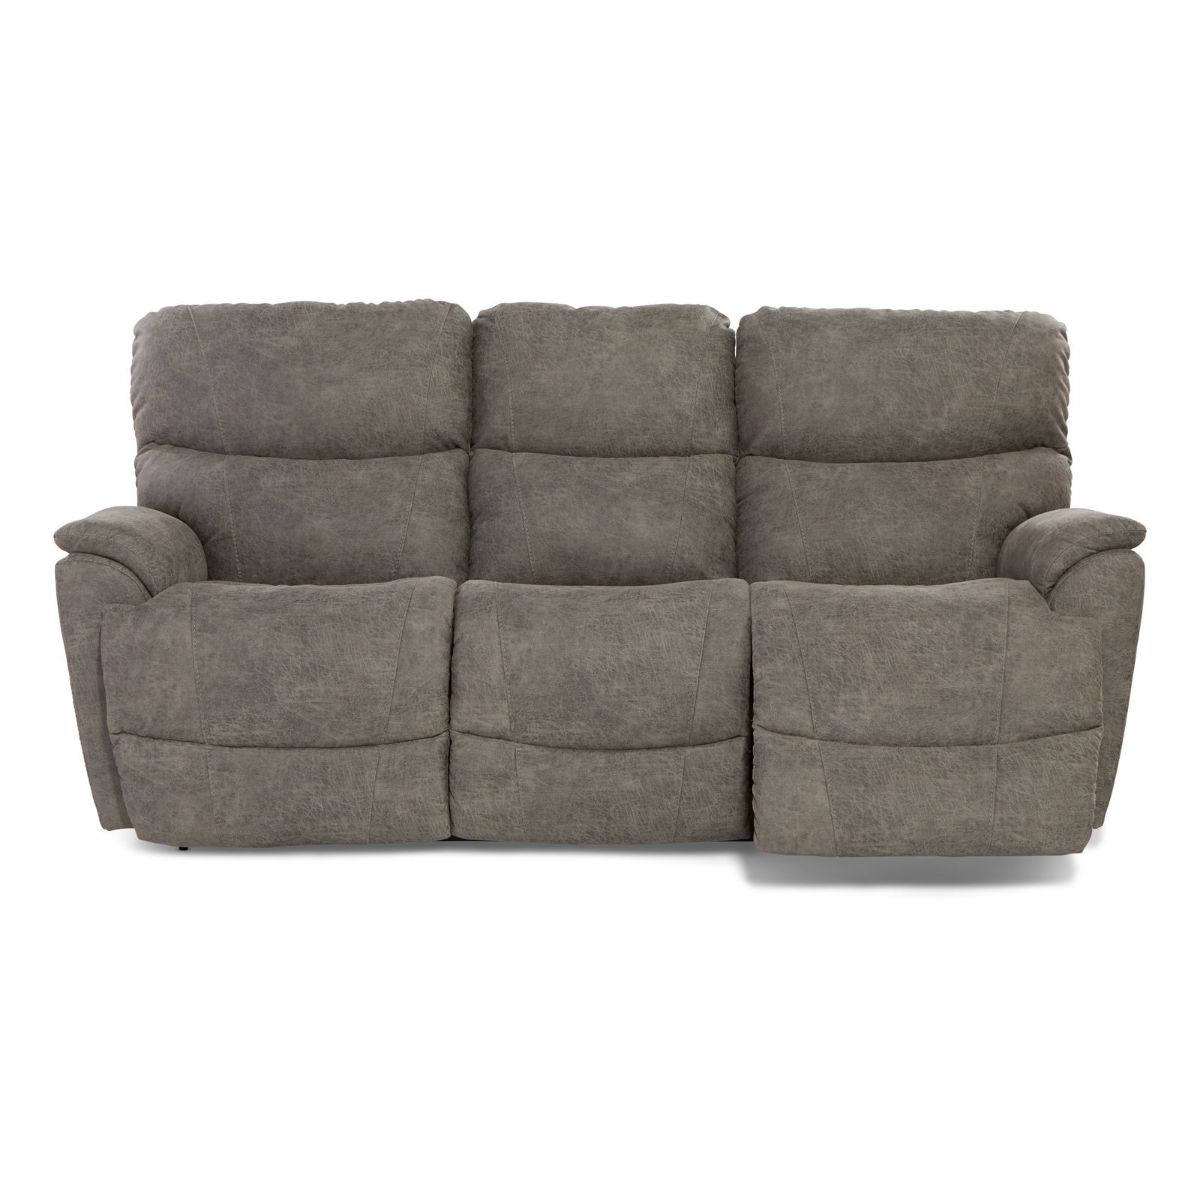 Picture of Trouper Sable Power Recliner Sofa with Headrest